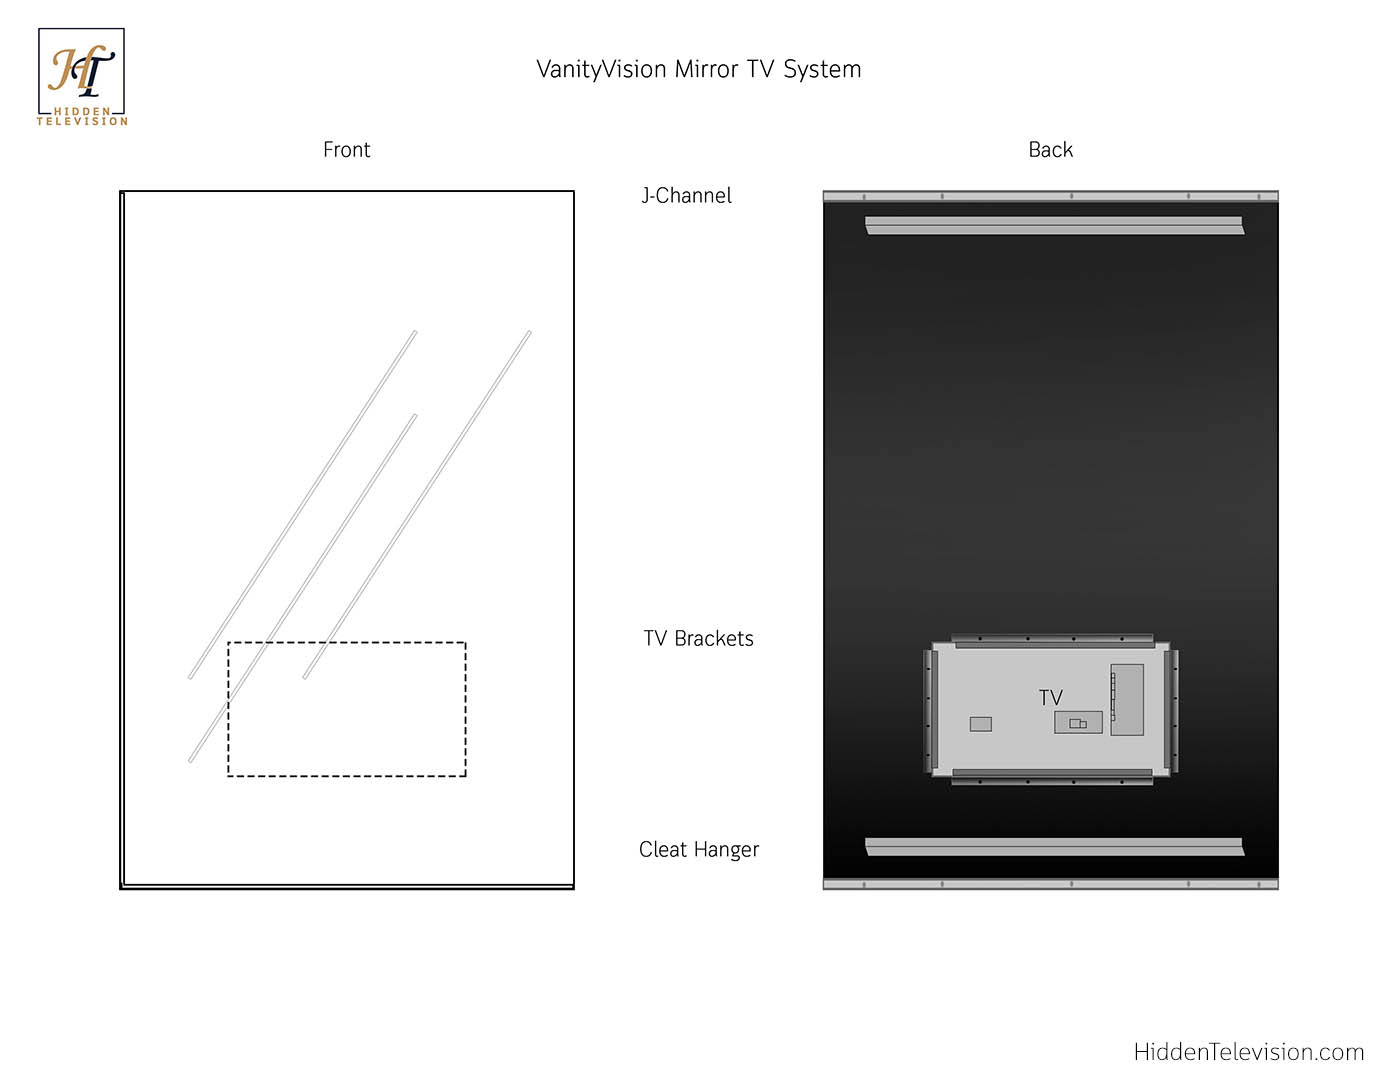 VanityVision Mirror TV Technical Drawing